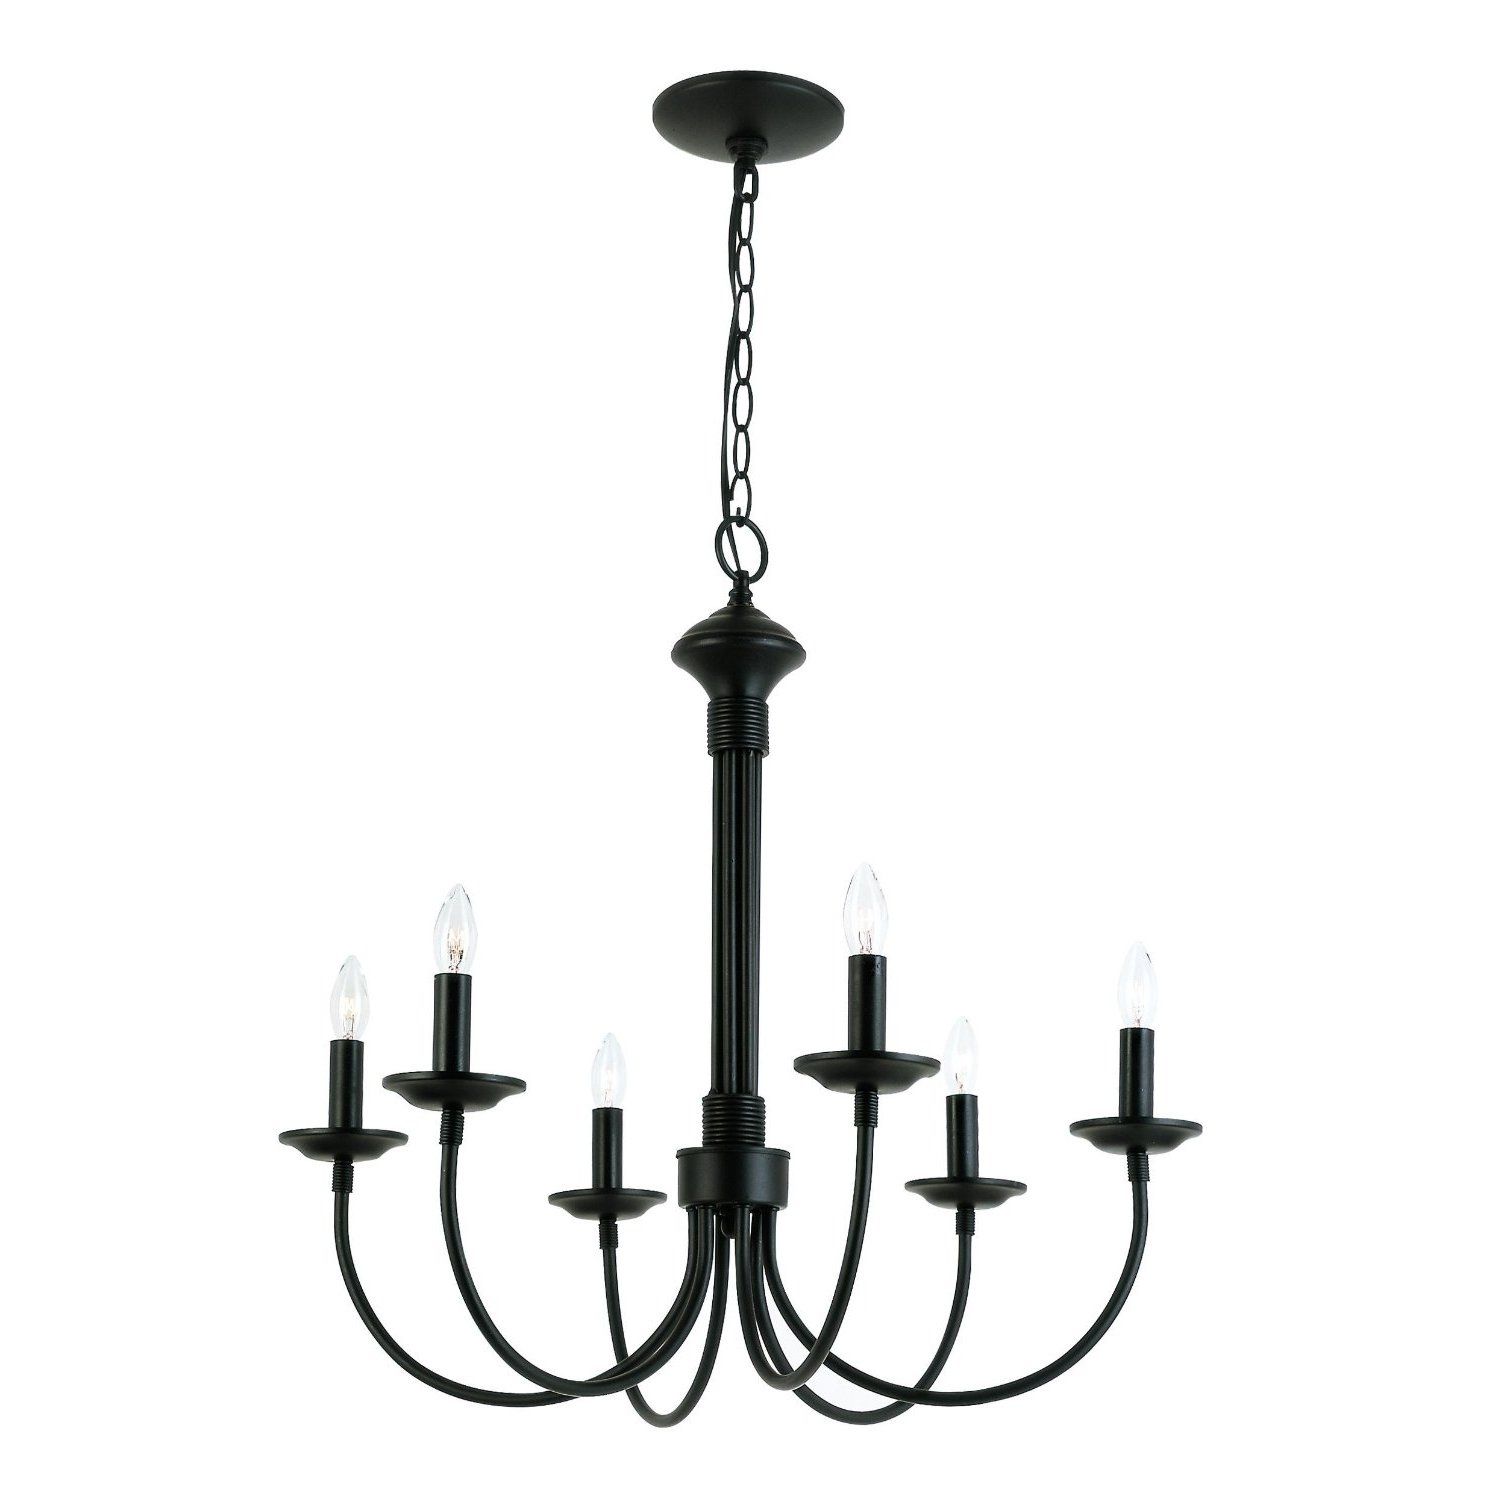 Charlton Home Blue Heron 6 Light Candle Style Chandelier Reviews Intended For Candle Light Chandelier (Photo 3 of 12)